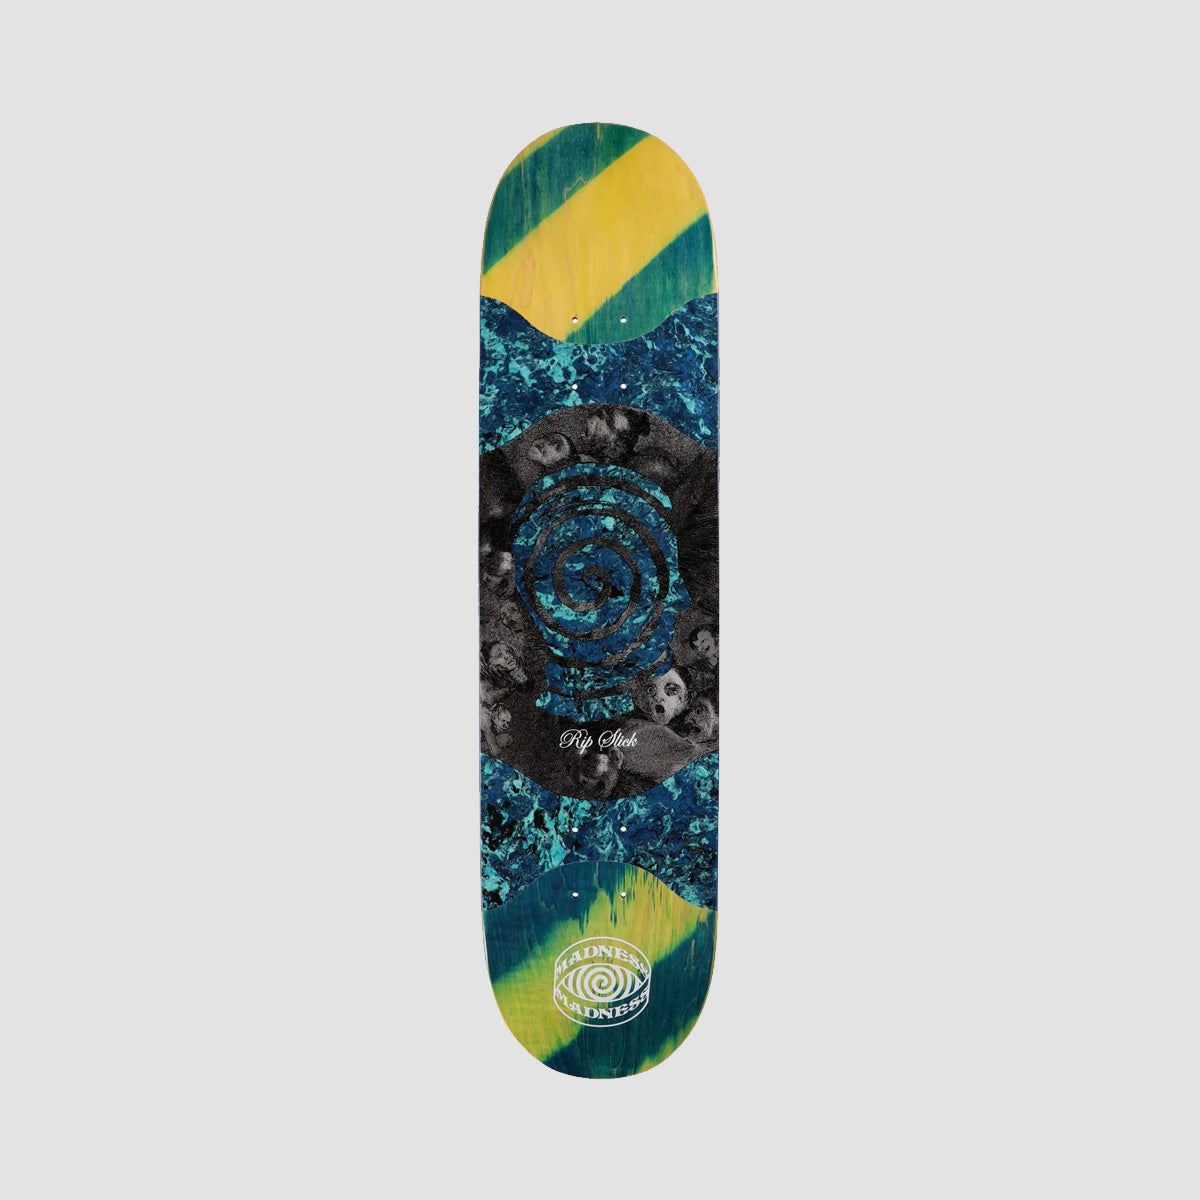 Madness Voices R7 Rip Slick On Middle Section Skateboard Deck Blue/Green - 8.125"